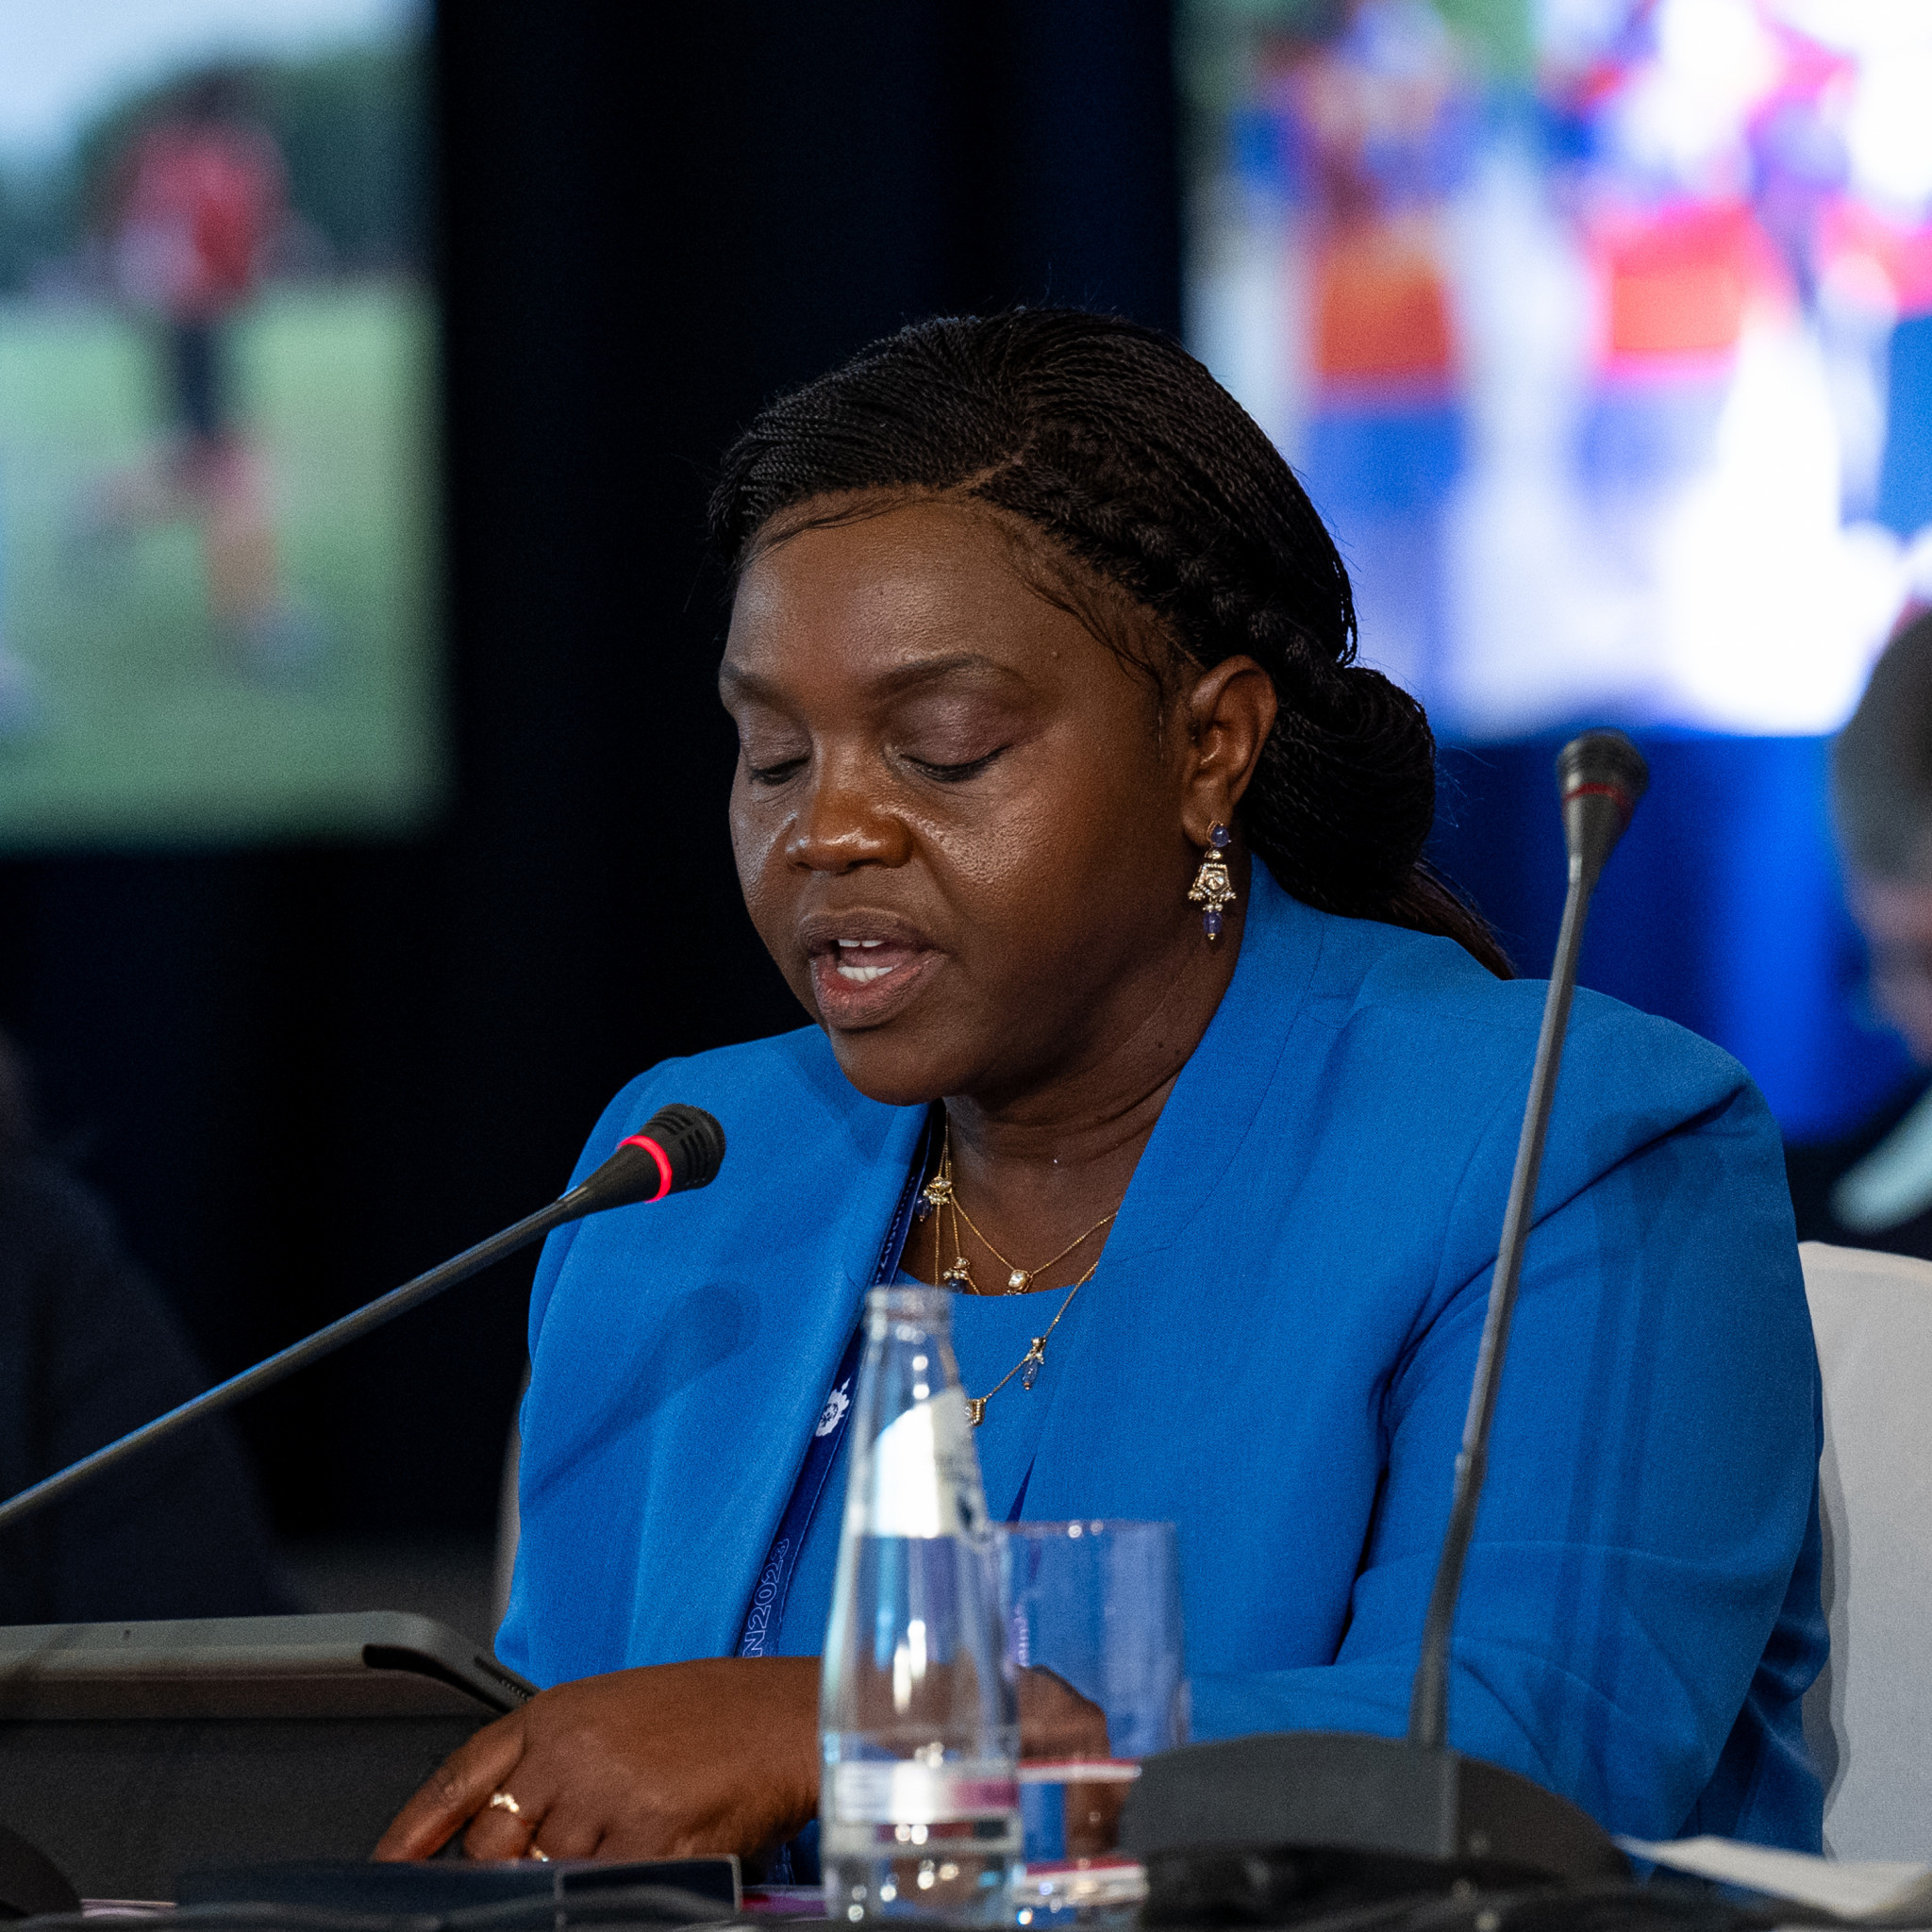 Kenya was among the 14 countries who became inaugural members of the Coalition, and was represented by Second Lady Dorcas Rigathi ©Ralf Kuckuck/Special Olympics Europe Eurasia